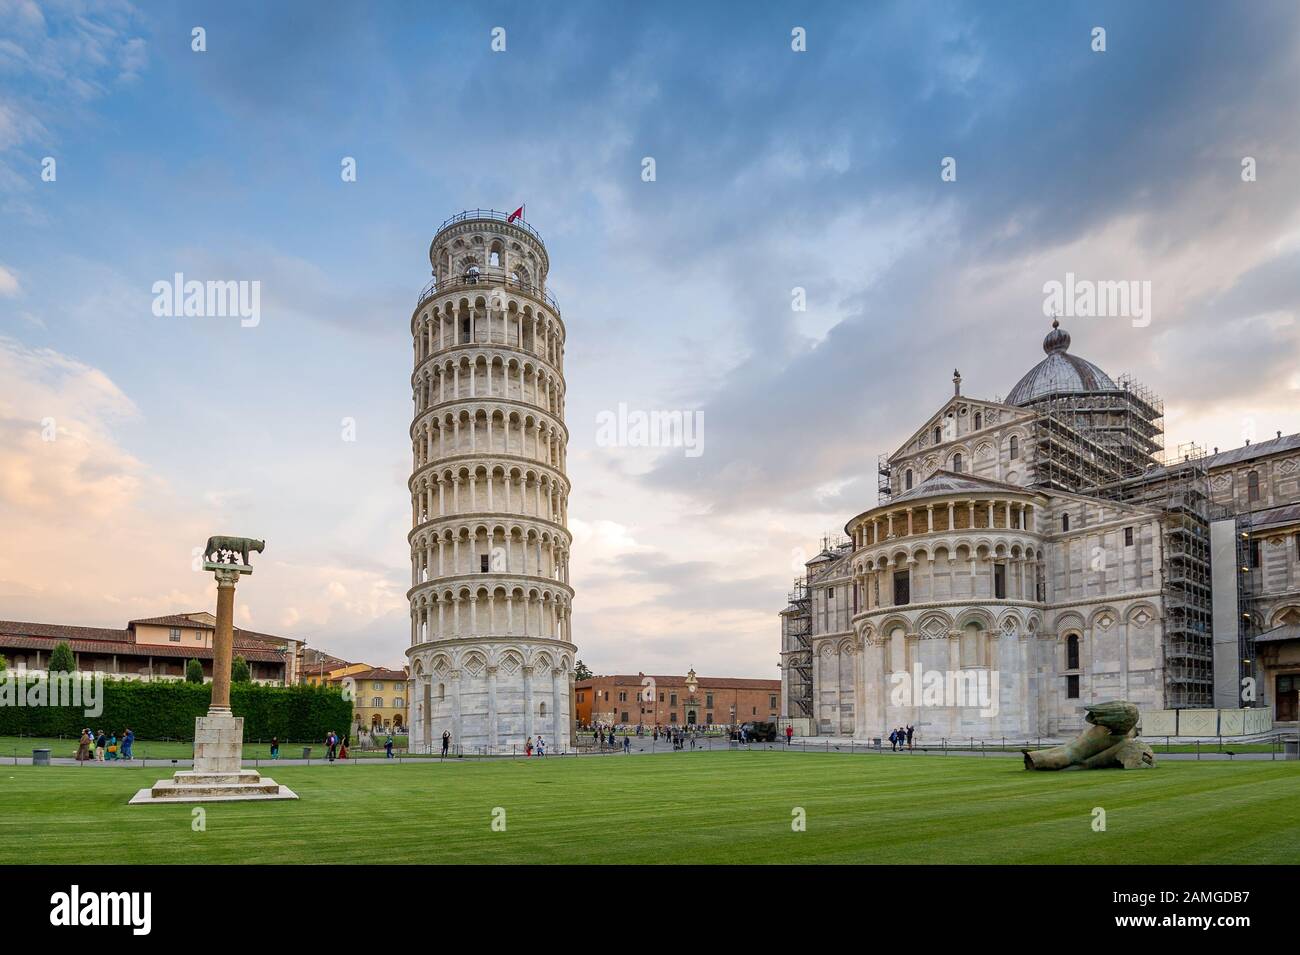 Pisa Duomo, famous tiltimg tower and central squaer at sunset. Pisa, Italy. Stock Photo